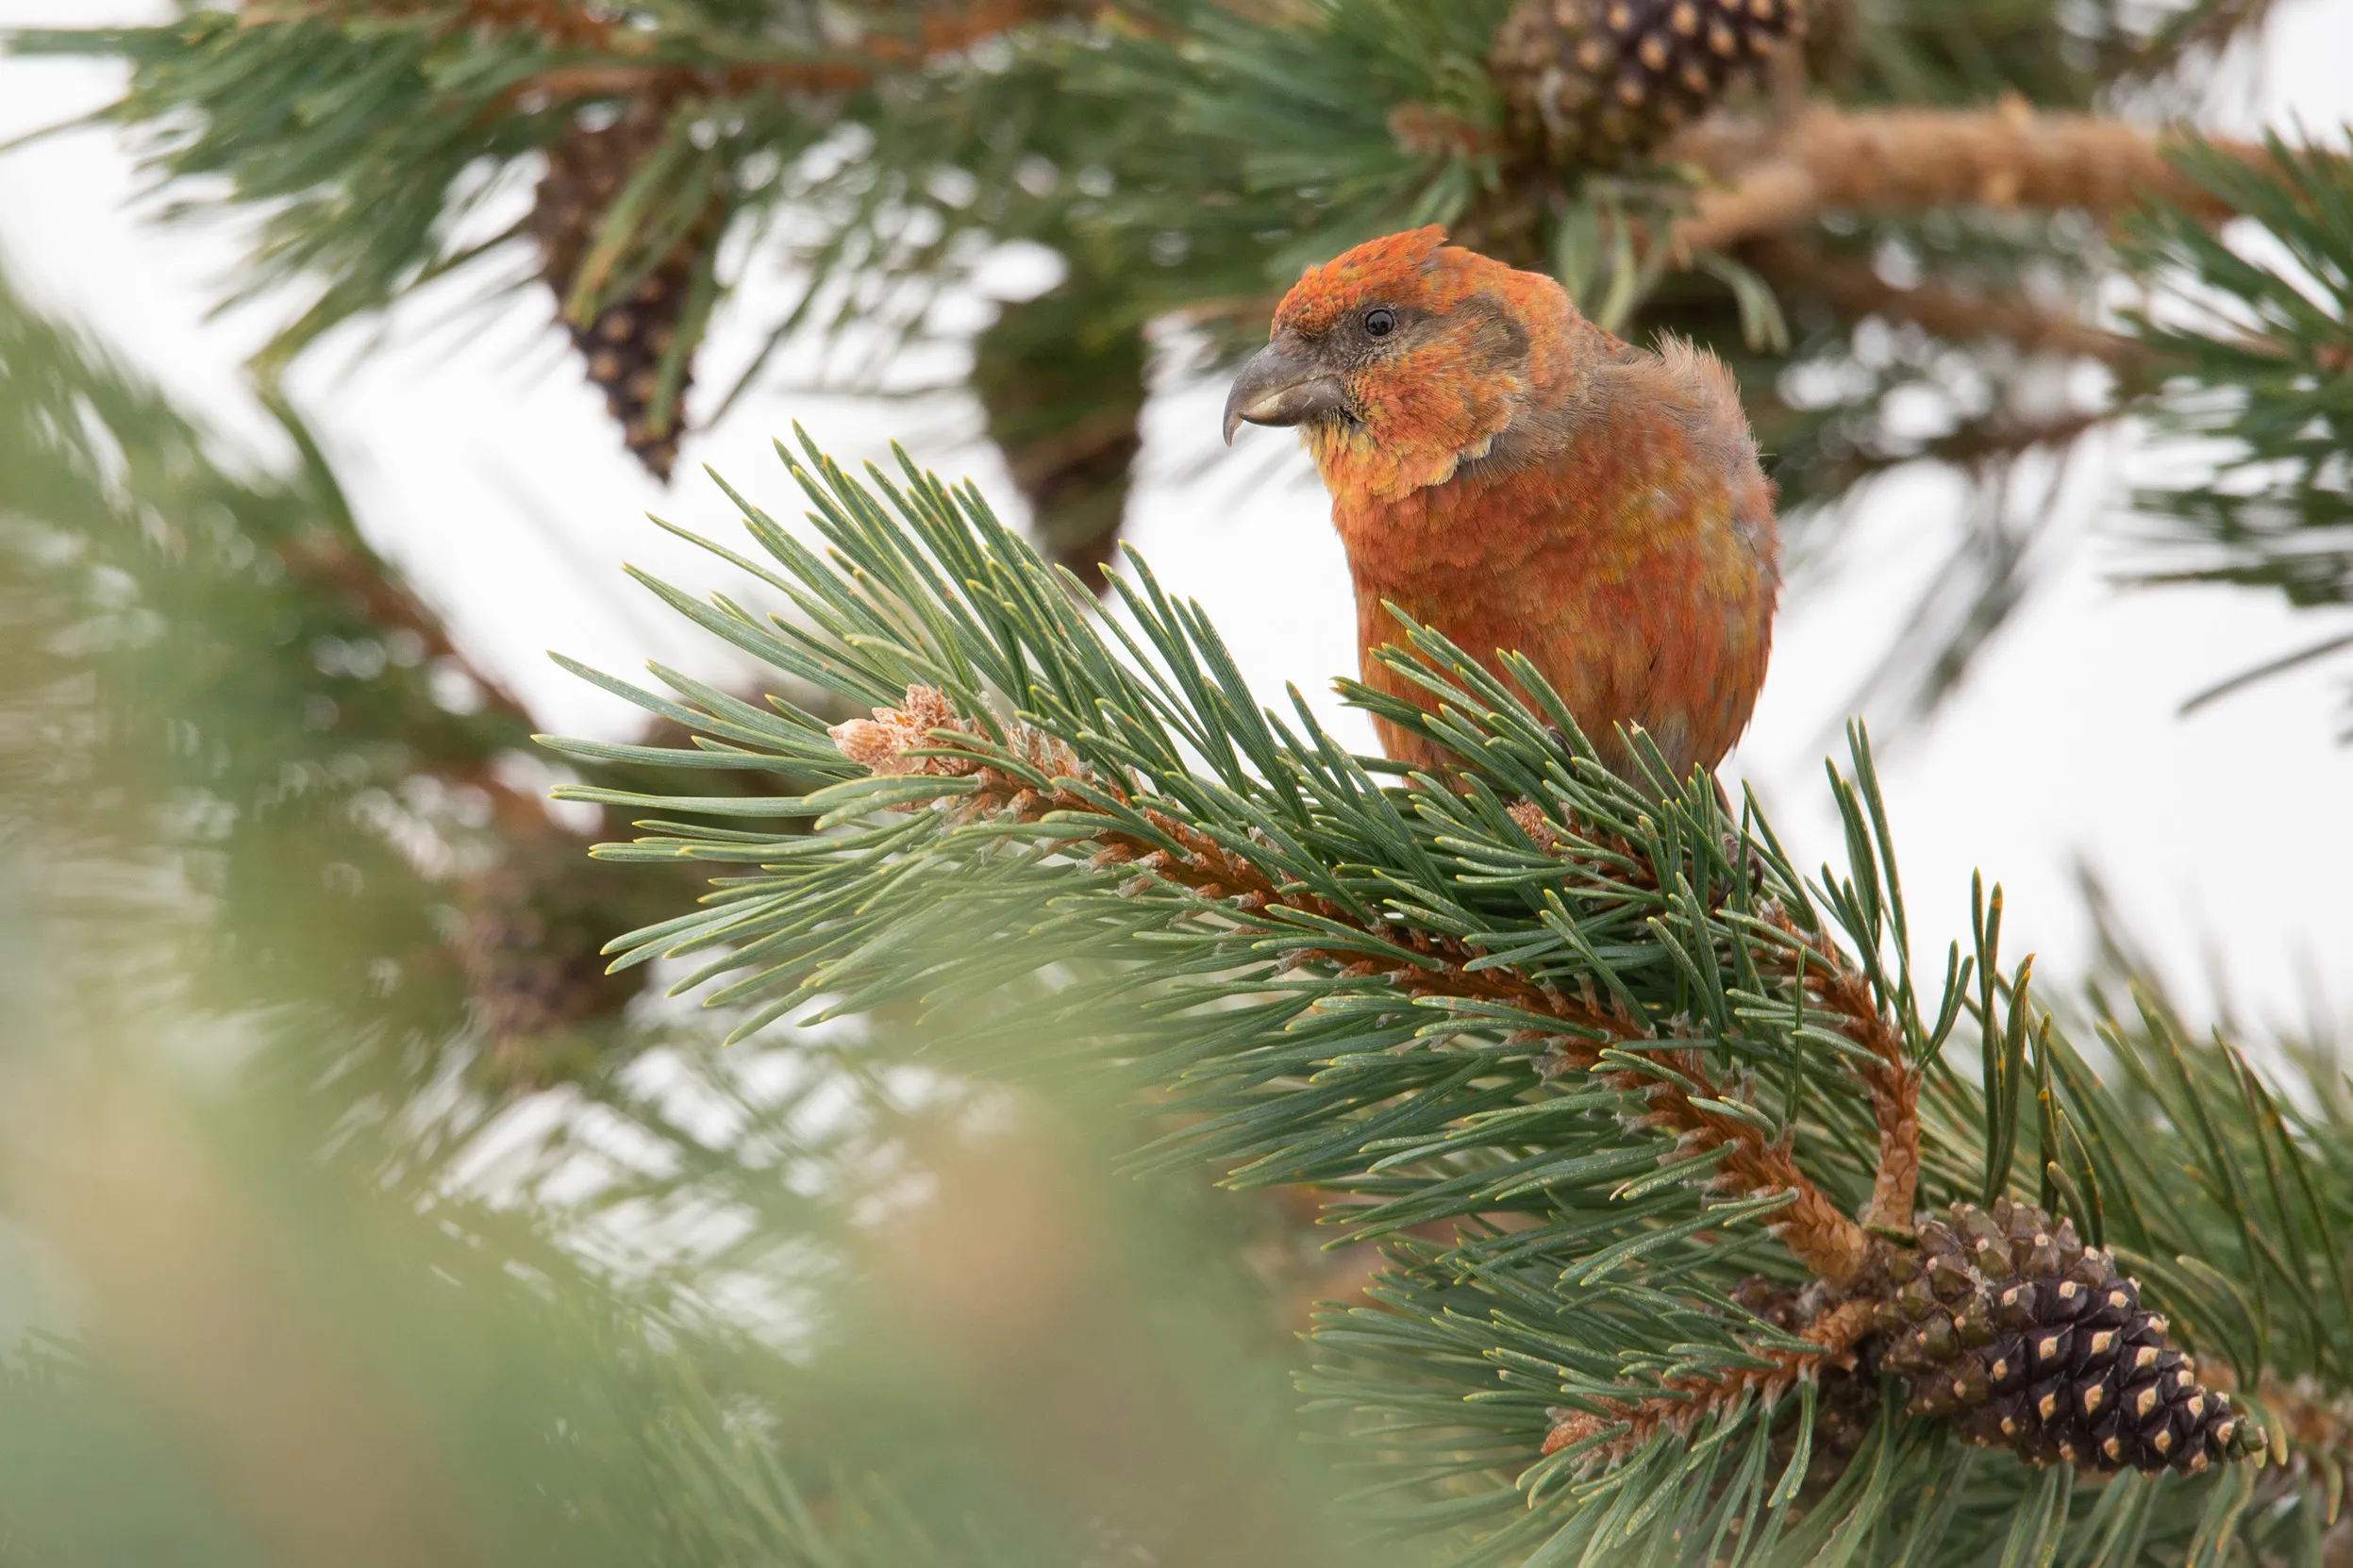 Male Scottish Crossbill perched in a pine tree.